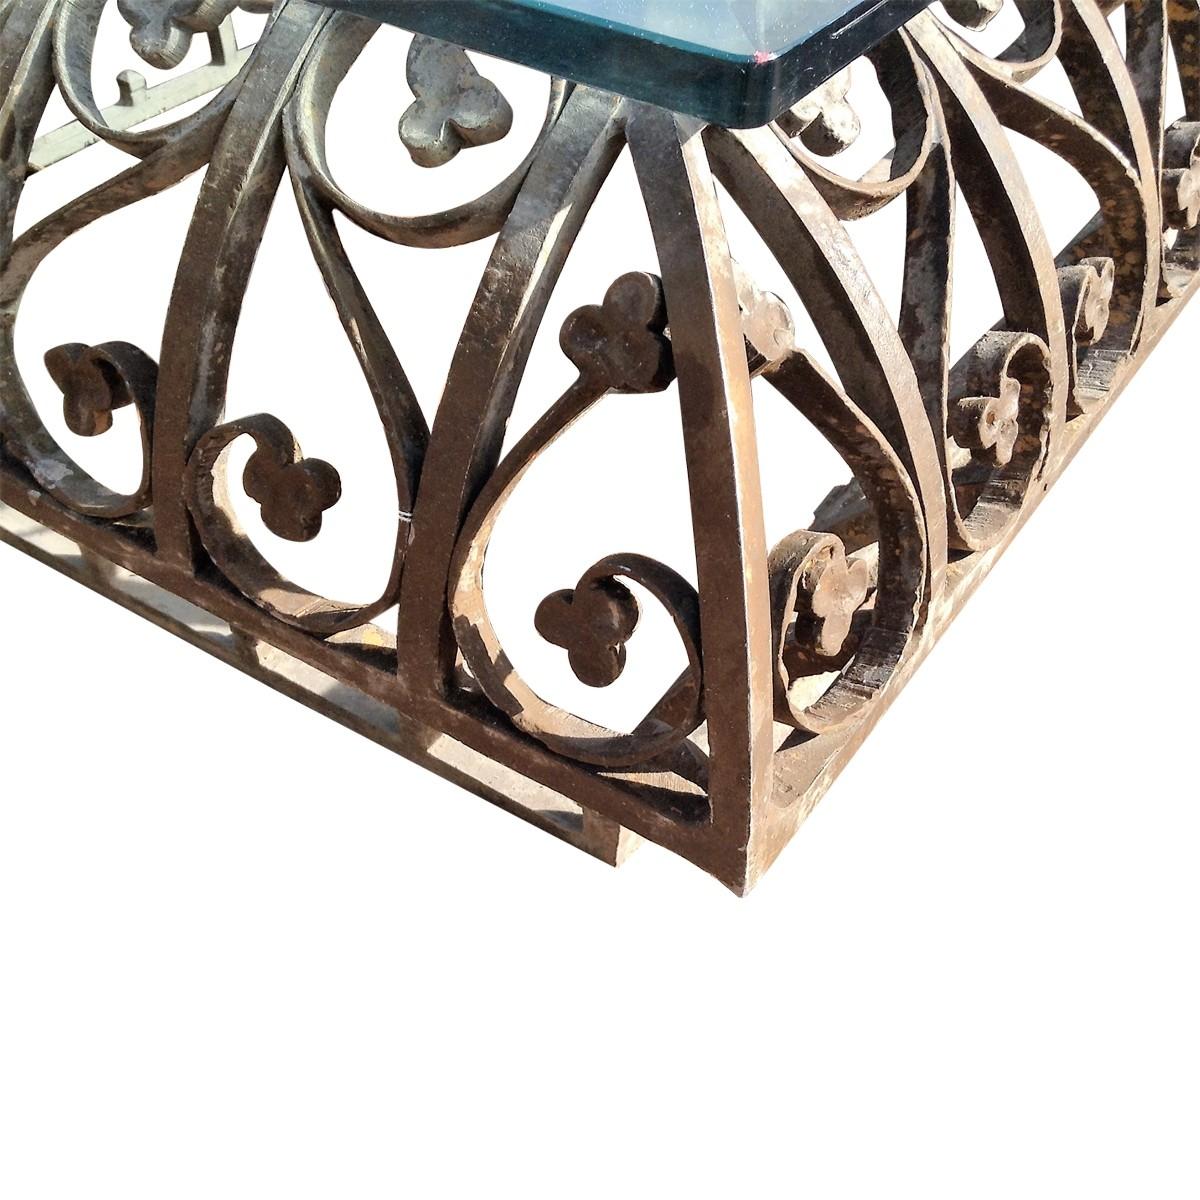 Phyllis Morris is renowned for crafting furniture with dramatic style from luxurious materials. Bold but sleek, this eye-catching coffee table features a patinated wrought iron base with a foliate and scroll motif. A rectangular shaped smoky glass